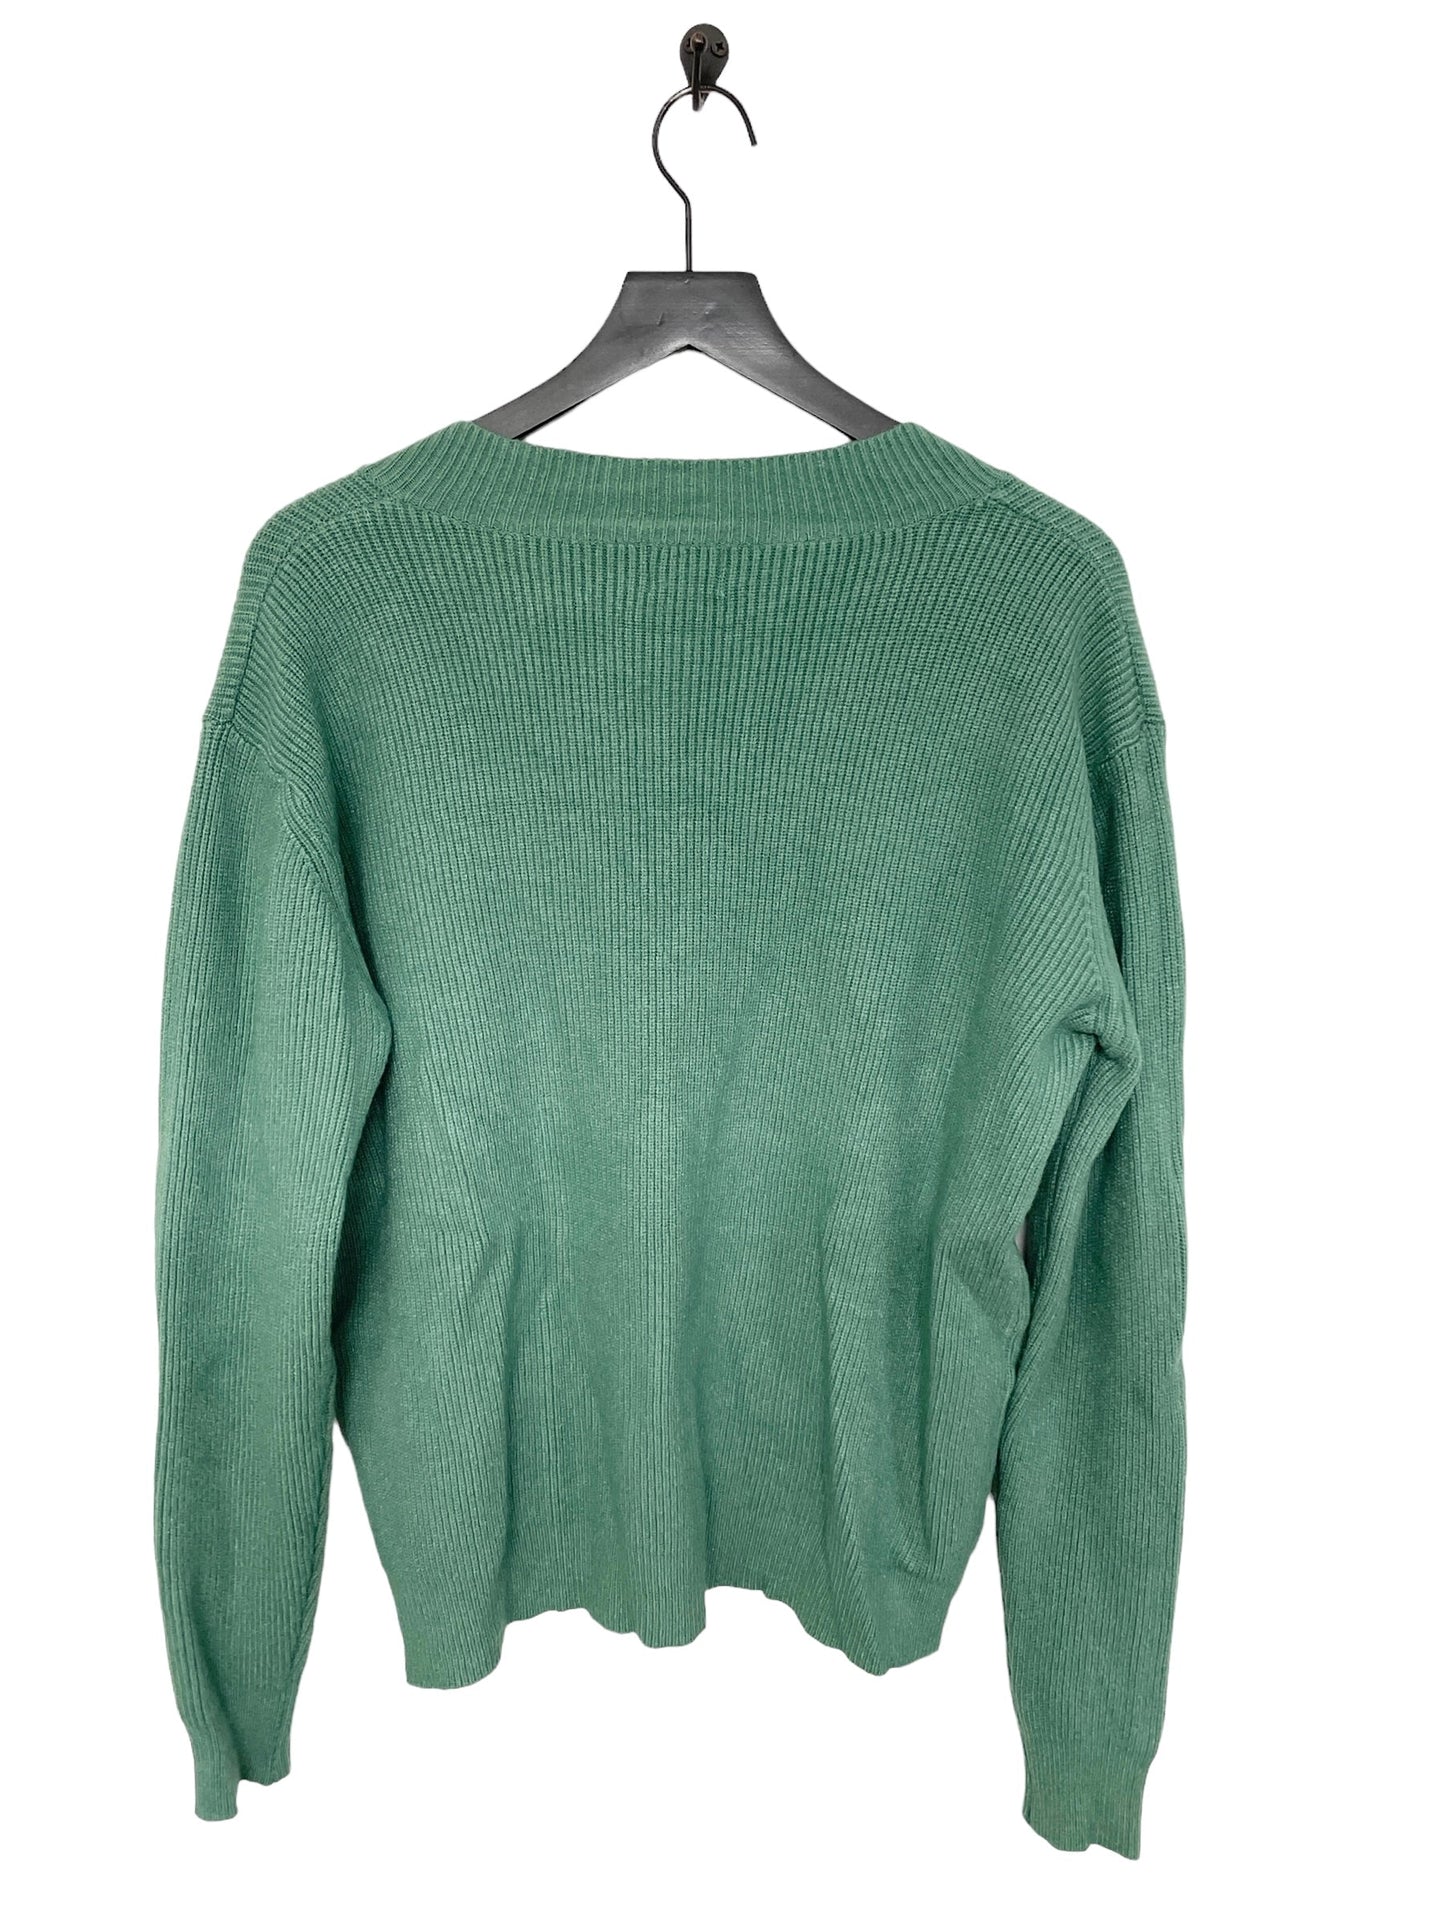 Green Sweater Dreamers, Size S